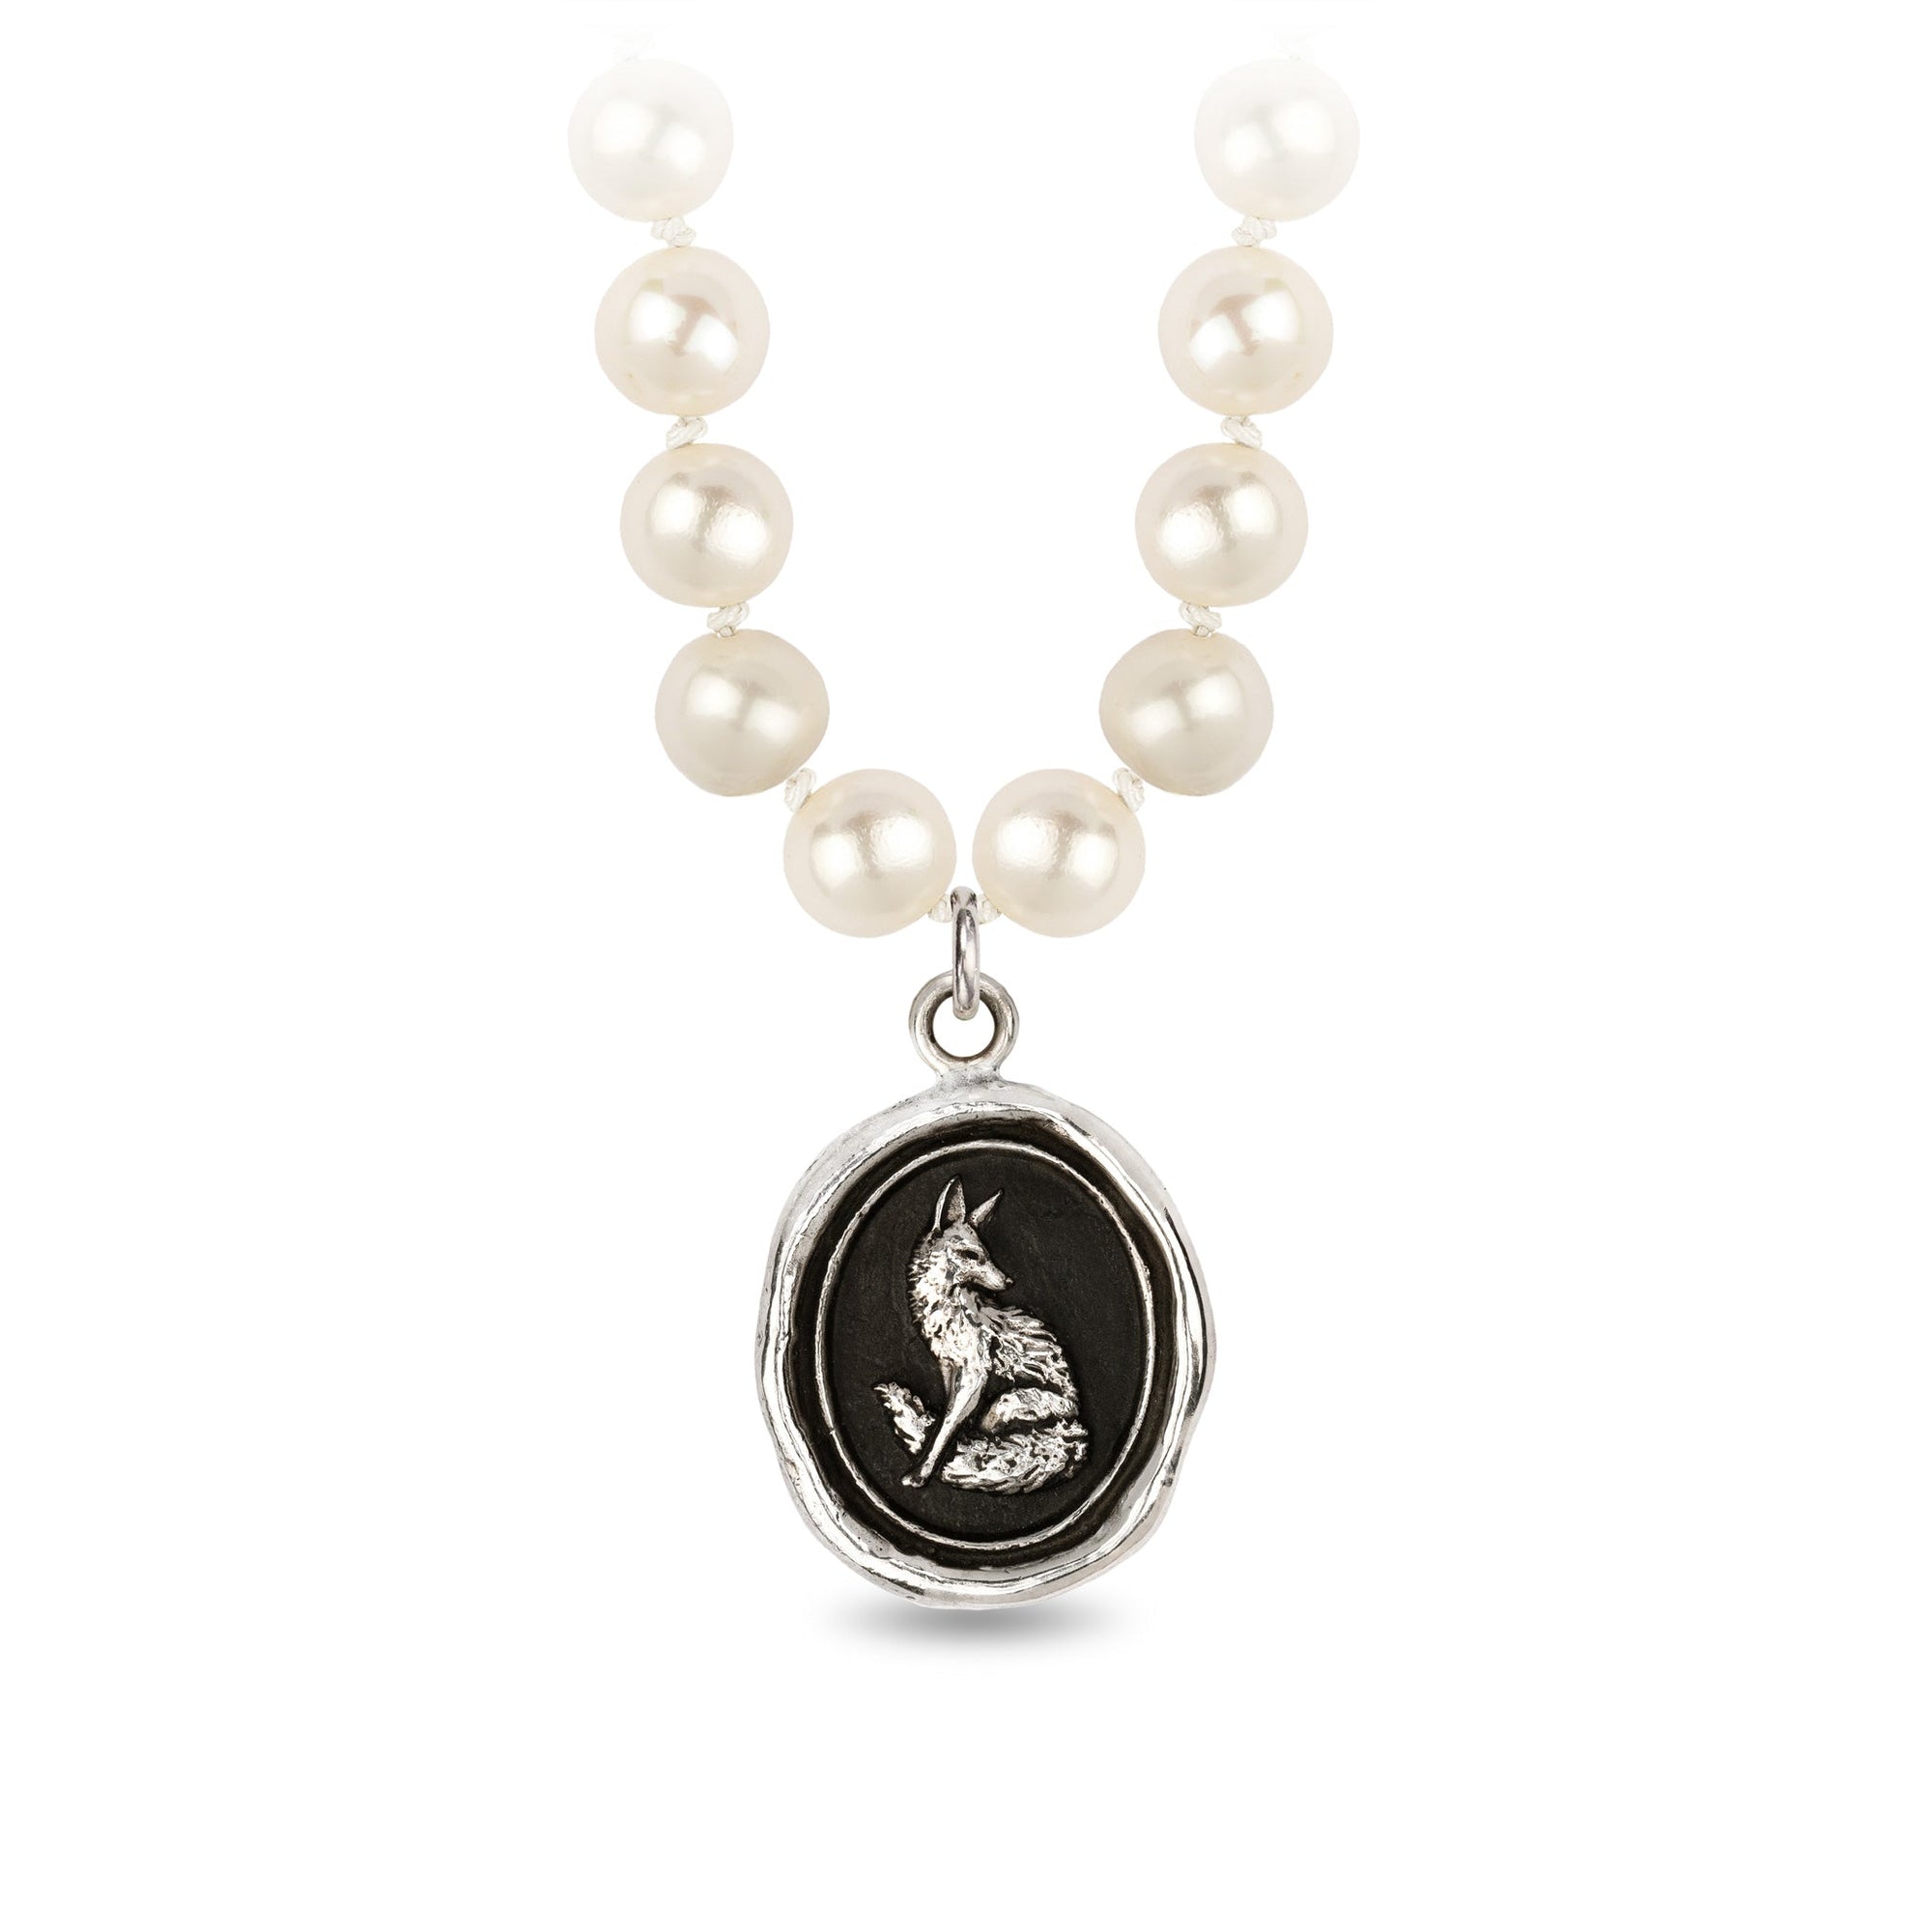 Trust in Yourself Freshwater Pearl Necklace - Ivory